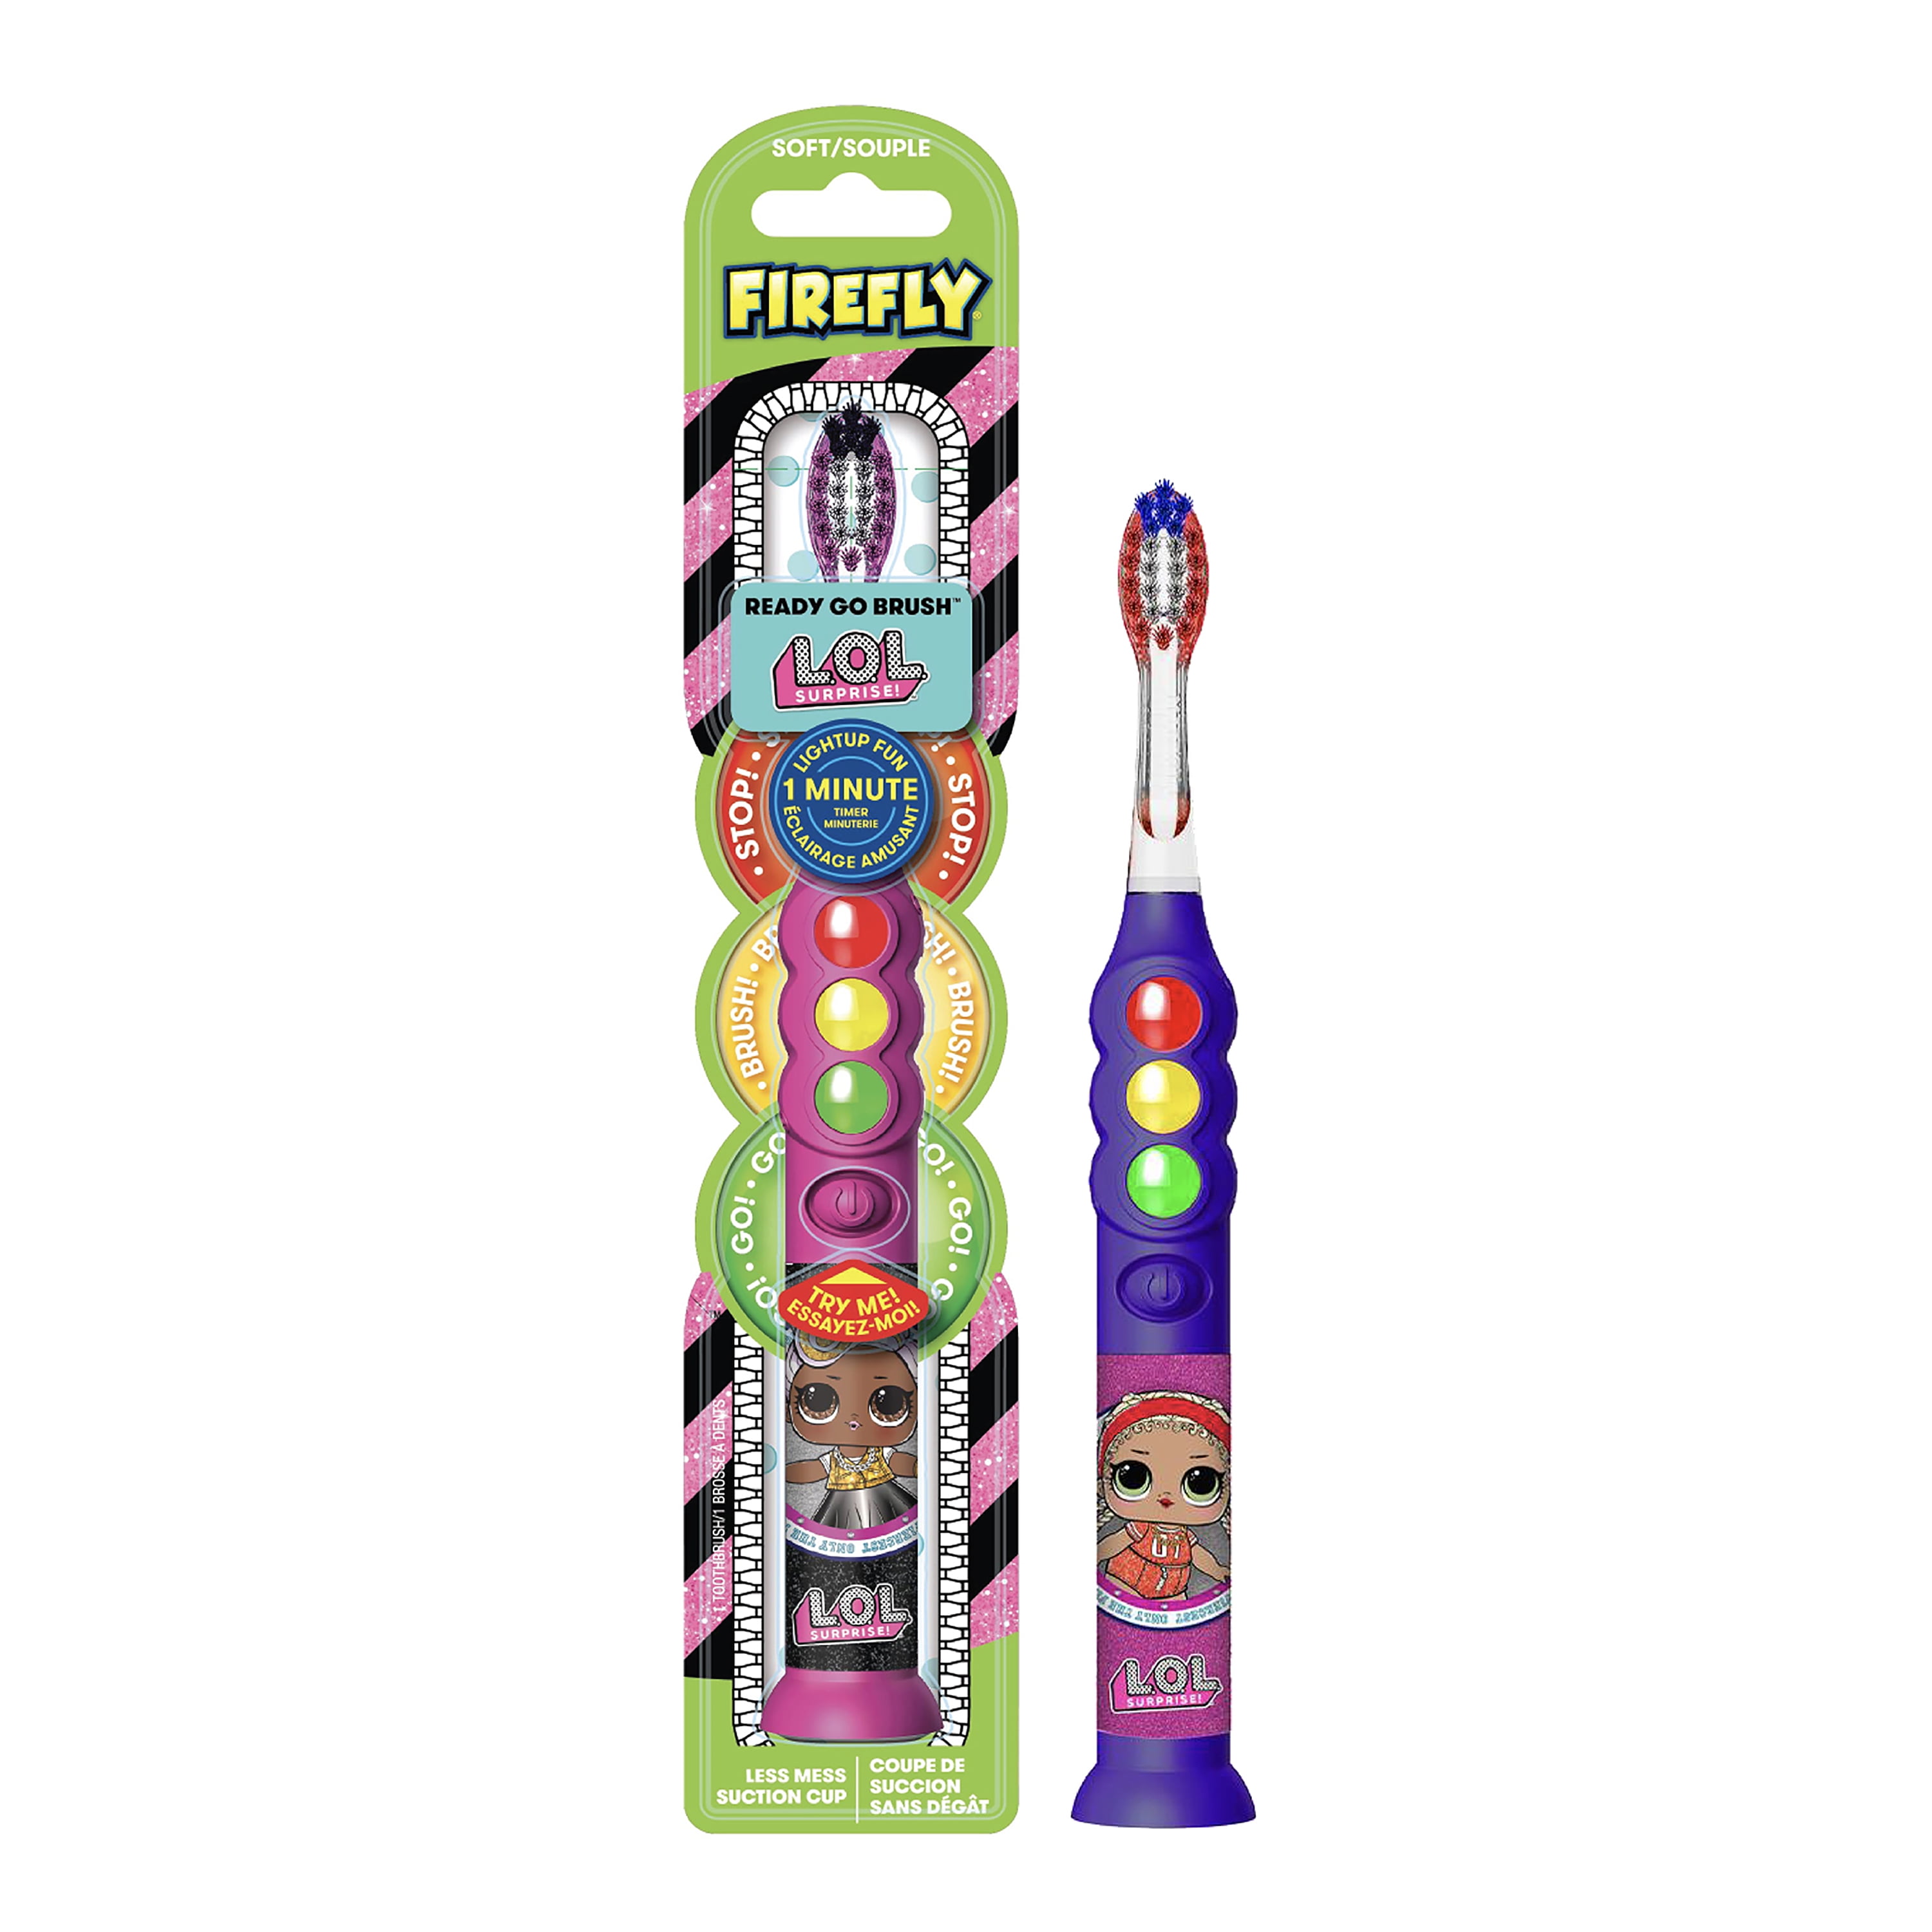 patron Vedrørende Troende Firefly Ready Go Brush, Light Up Timer Toothbrush, L.O.L. Surprise!,  Premium Soft Bristles,1 Minute Timer, Less Mess Suction Cup, Battery  Included, Easy Storage, For Ages 3+, 1 Count - Walmart.com